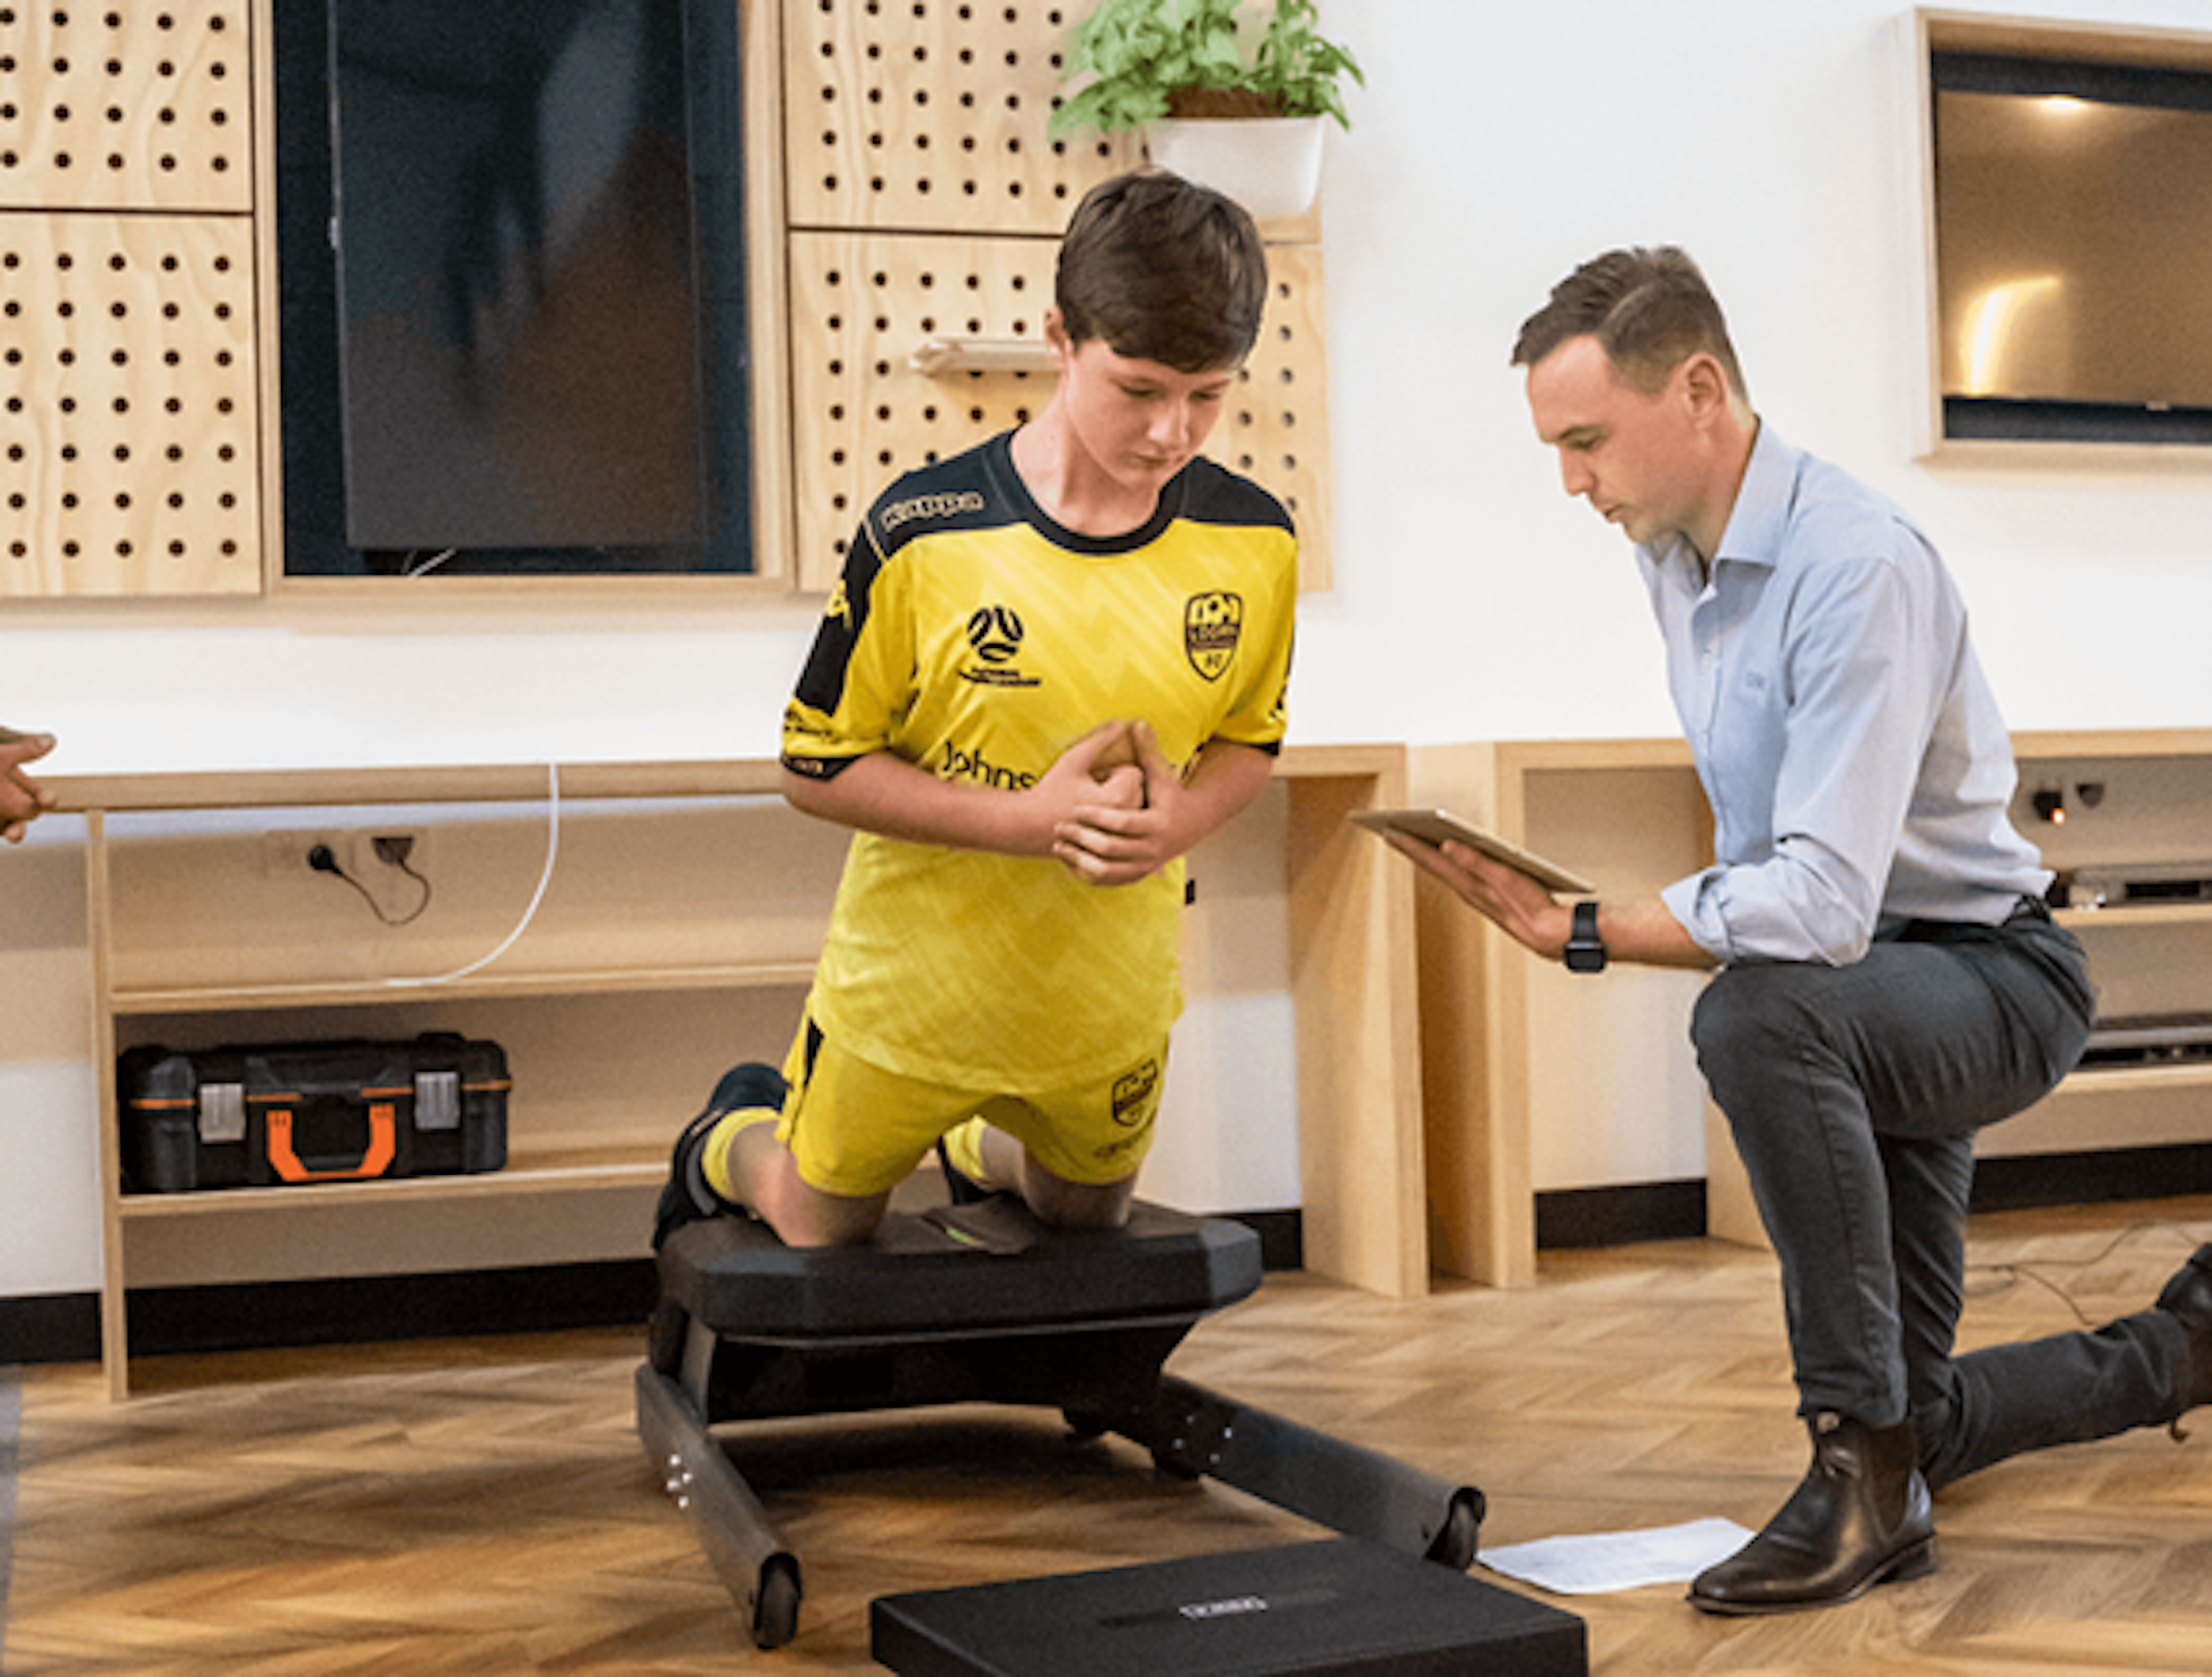 Physiotherapist Brad Moore conducting a Nordic test with an academy football player.